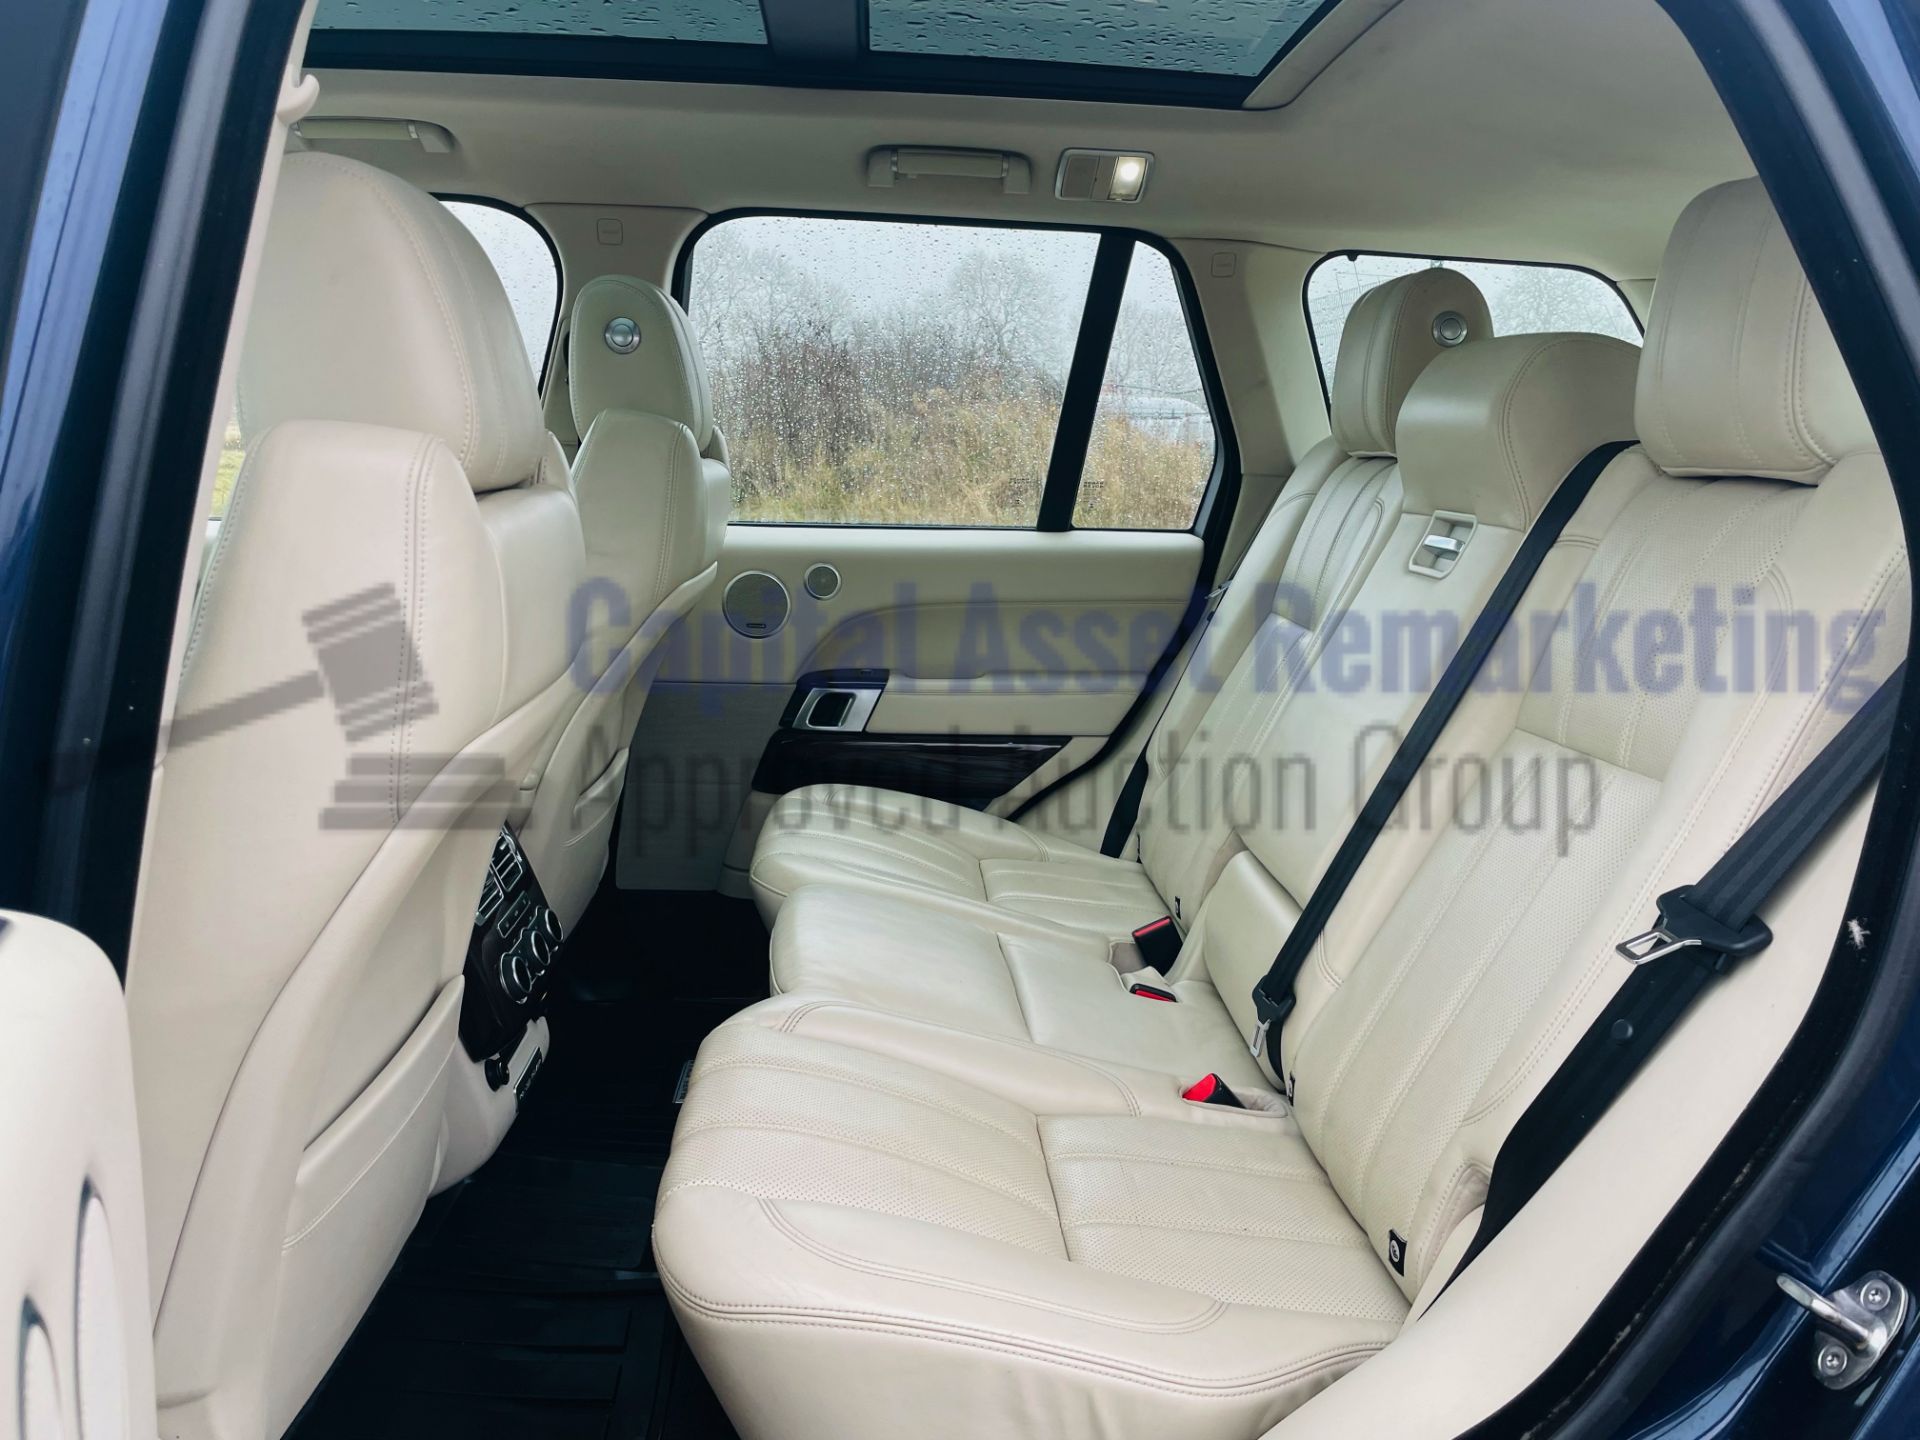 (On Sale) RANGE ROVER VOGUE *5 DOOR SUV* (2014 - NEW MODEL) '4.4 SDV8 - 8 SPEED AUTO' *FULLY LOADED* - Image 30 of 68